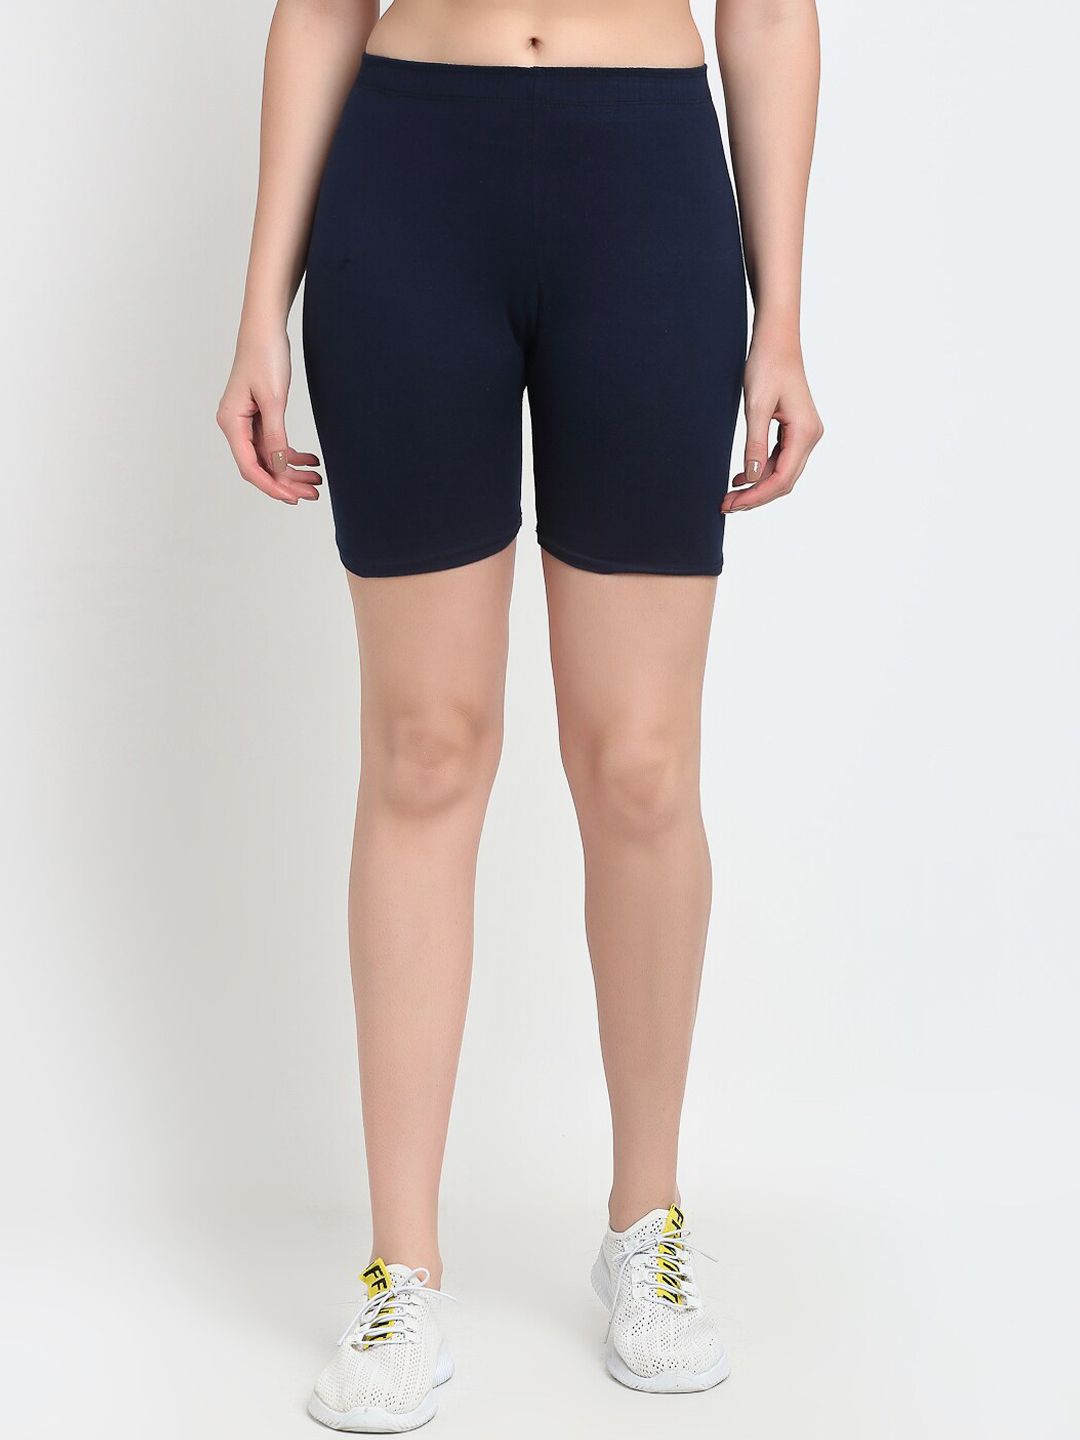 Jinfo Women Sports Shorts Price in India